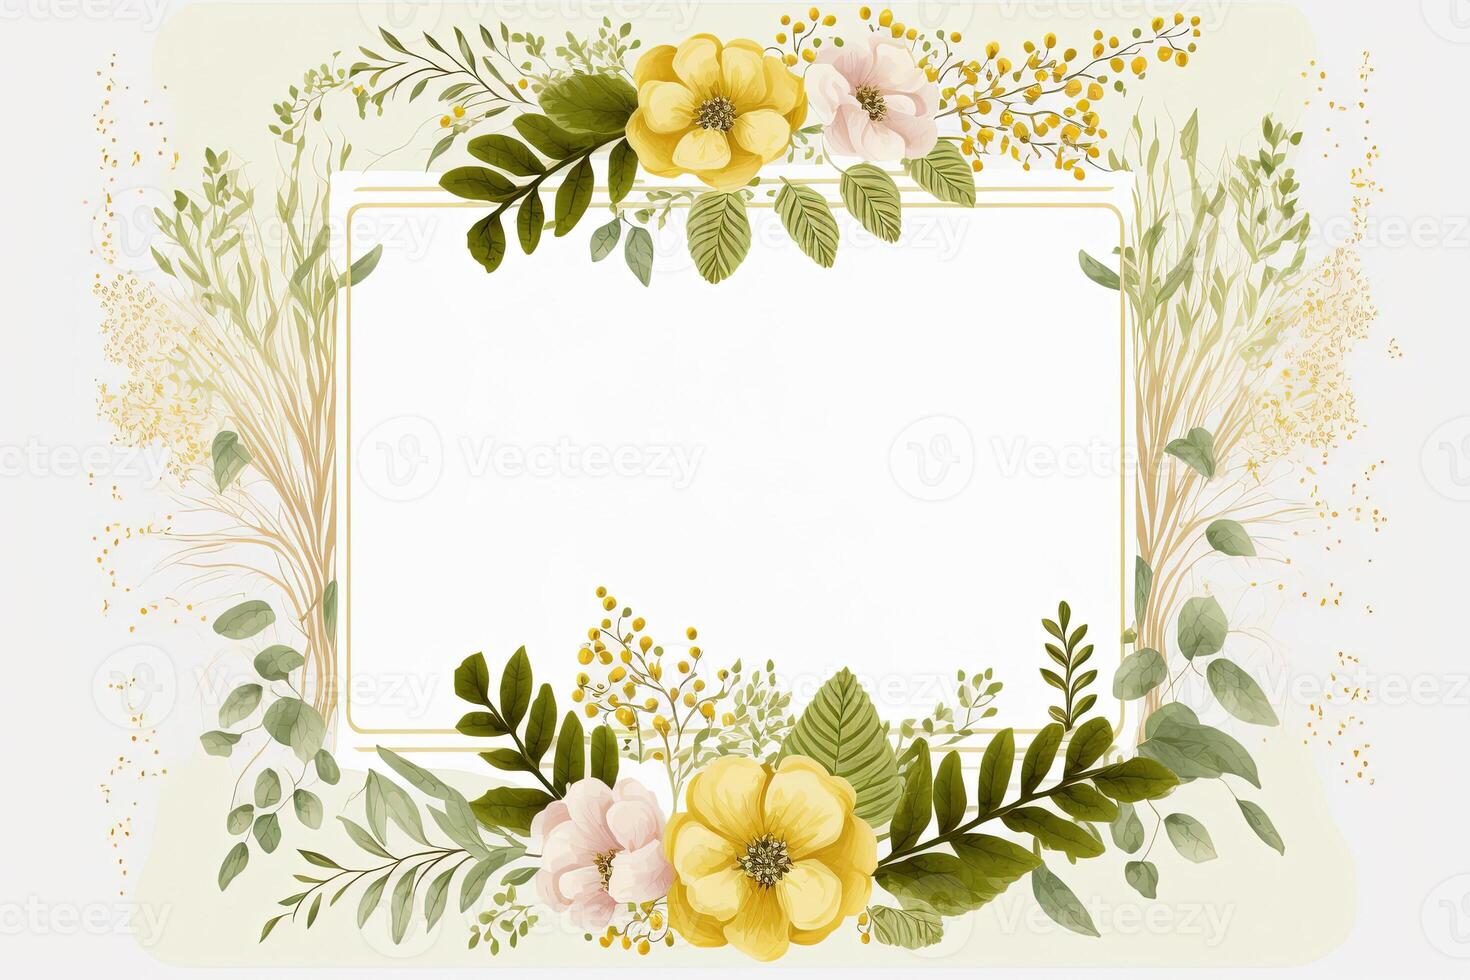 , Watercolor frame with yellow spring flowers, hand drawn art style with place for text. Greeting, birthday and other holiday, wedding invitation concept photo